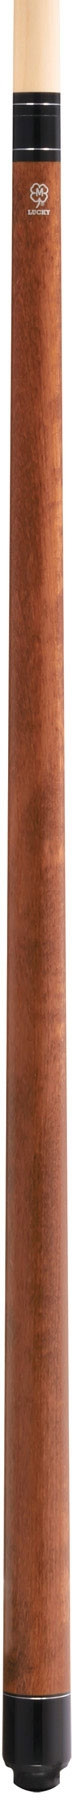 McDermott Lucky Pool Cue, L70, Brown